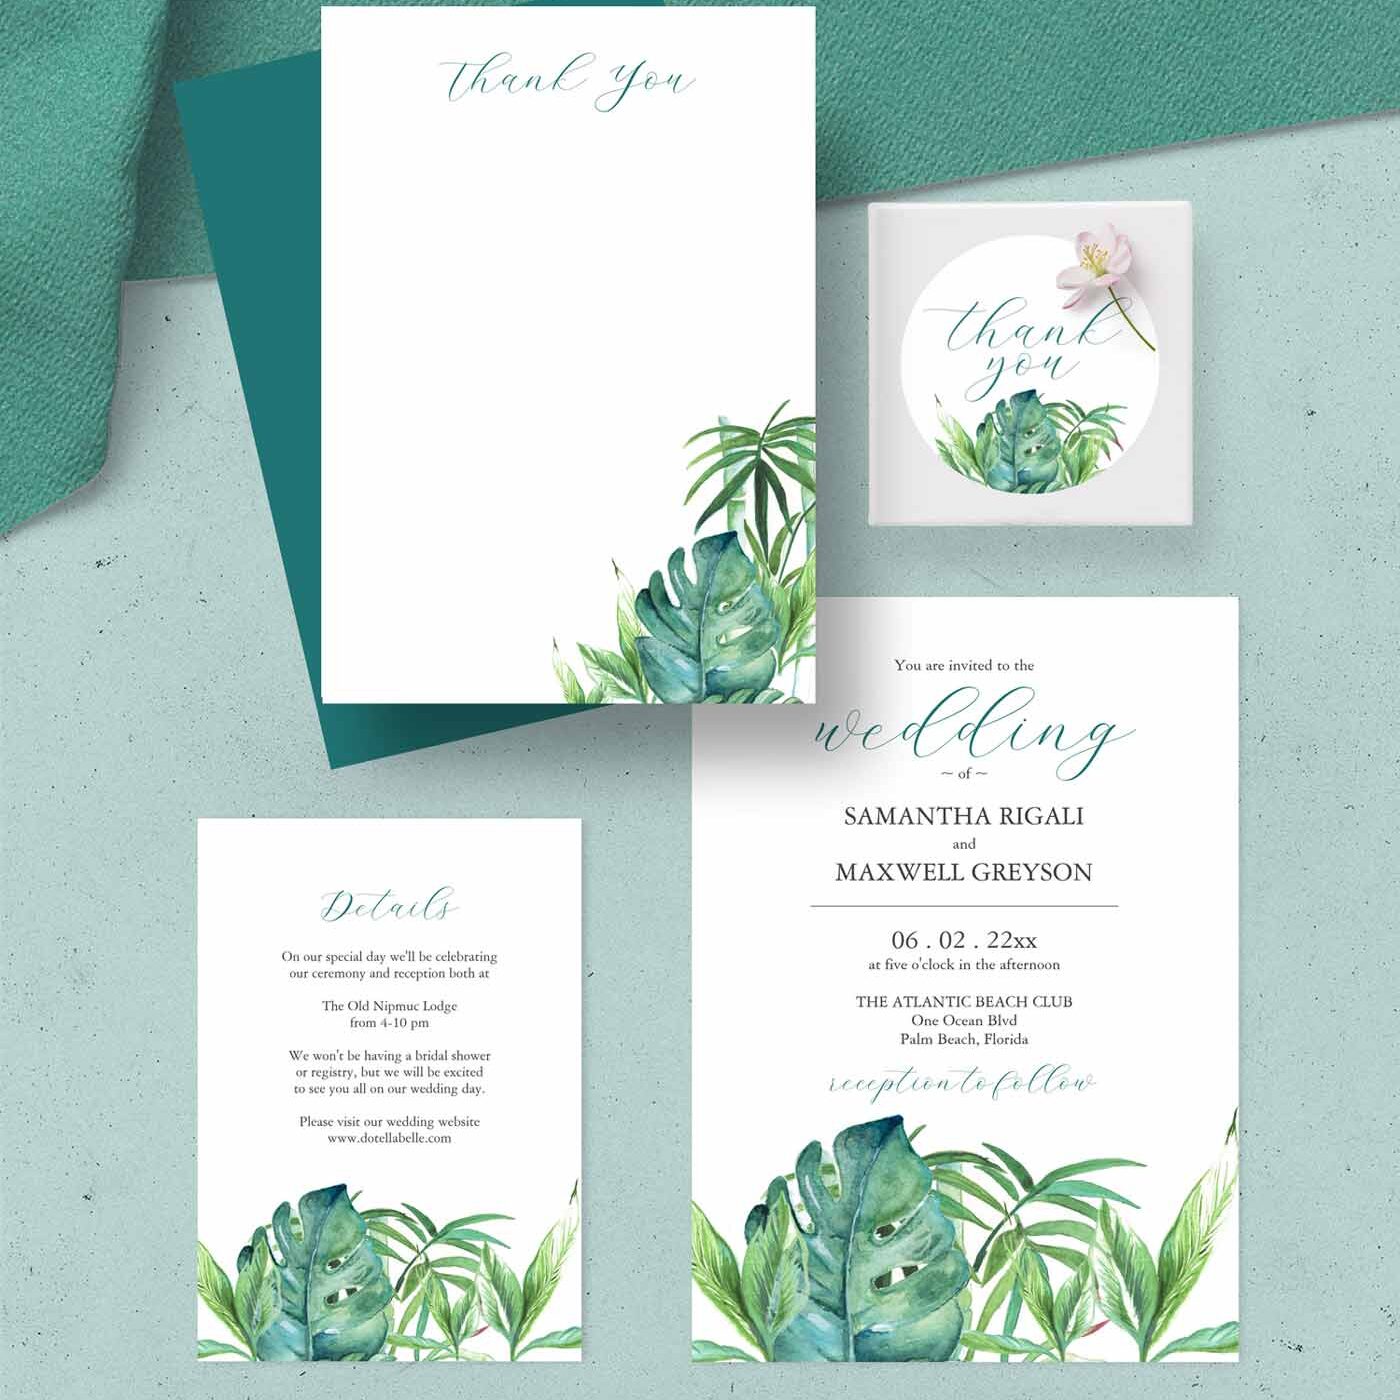 wedding theme filipiniana destination features watercolor art by Victoria Grigaliunas tropical palm leaves